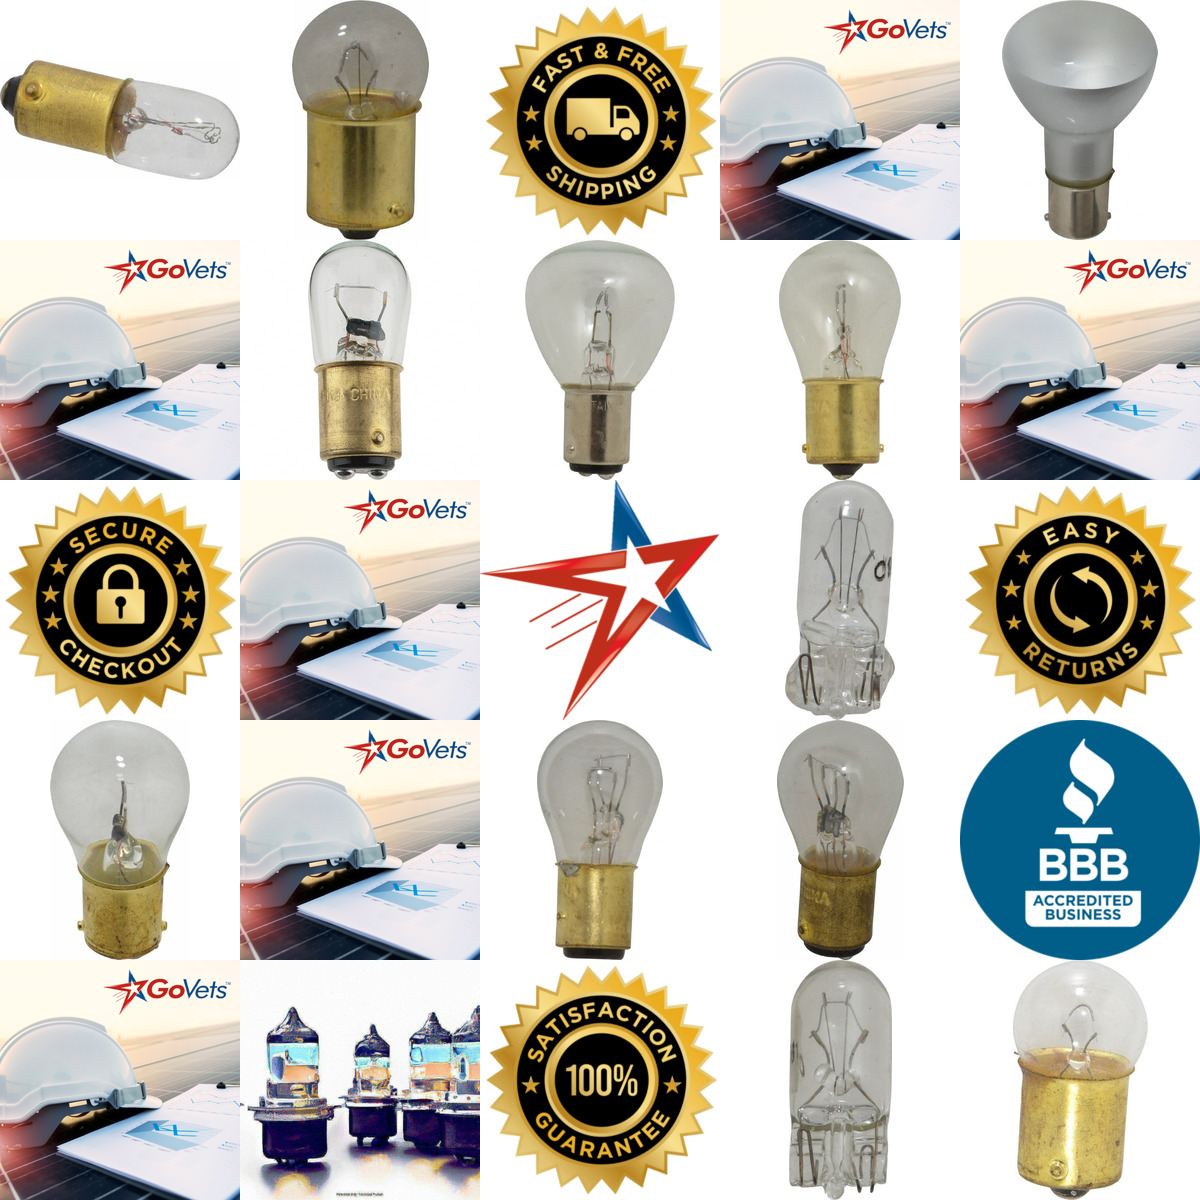 A selection of Automotive Miniature Lamps products on GoVets